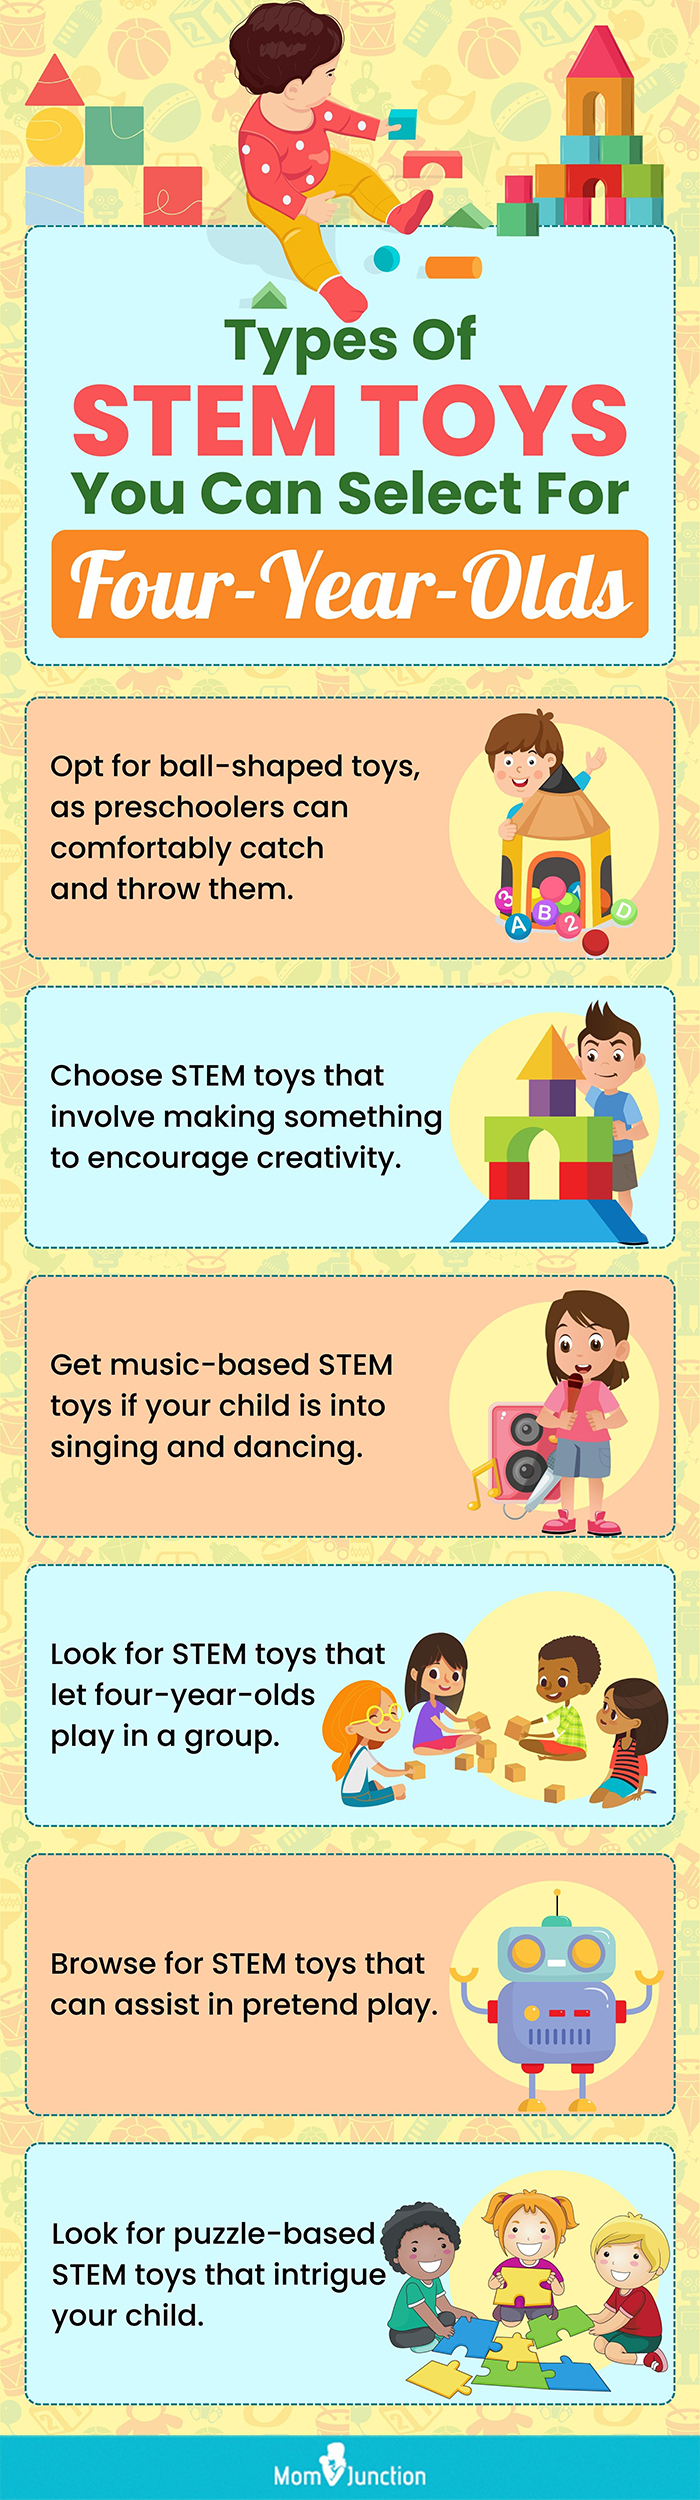 Types Of STEM Toys You Can Select For Four-Year-Olds